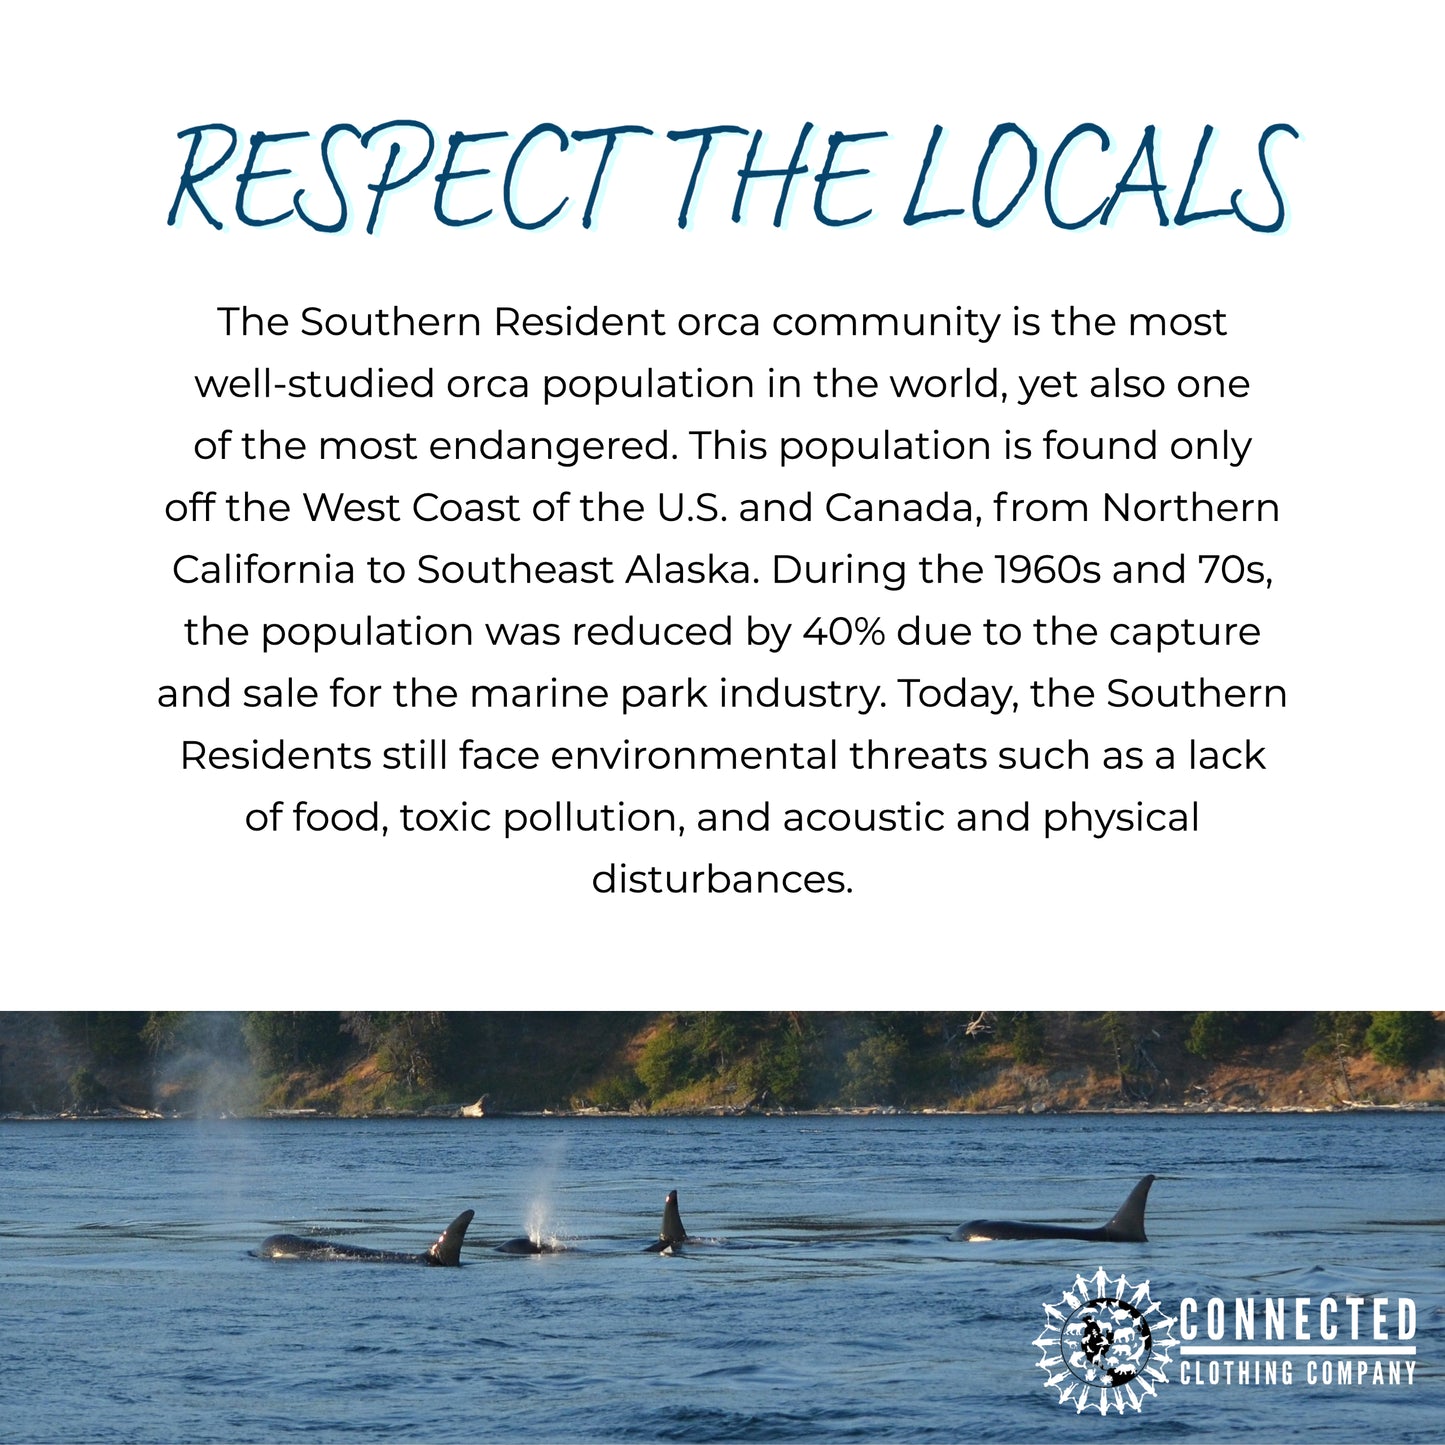 Respect The Locals. The Southern resident orca community is the most well-studied orca population in the world, yet also one of the most endangered. This population is found only off the West Coast of the U.S. and Canada, from northern california to southeast alaska. During the 1960s and 70s, the population was reduced by 40% due to the capture and sale for the marine park industry. Today, the Southern residents still face environmental threats 